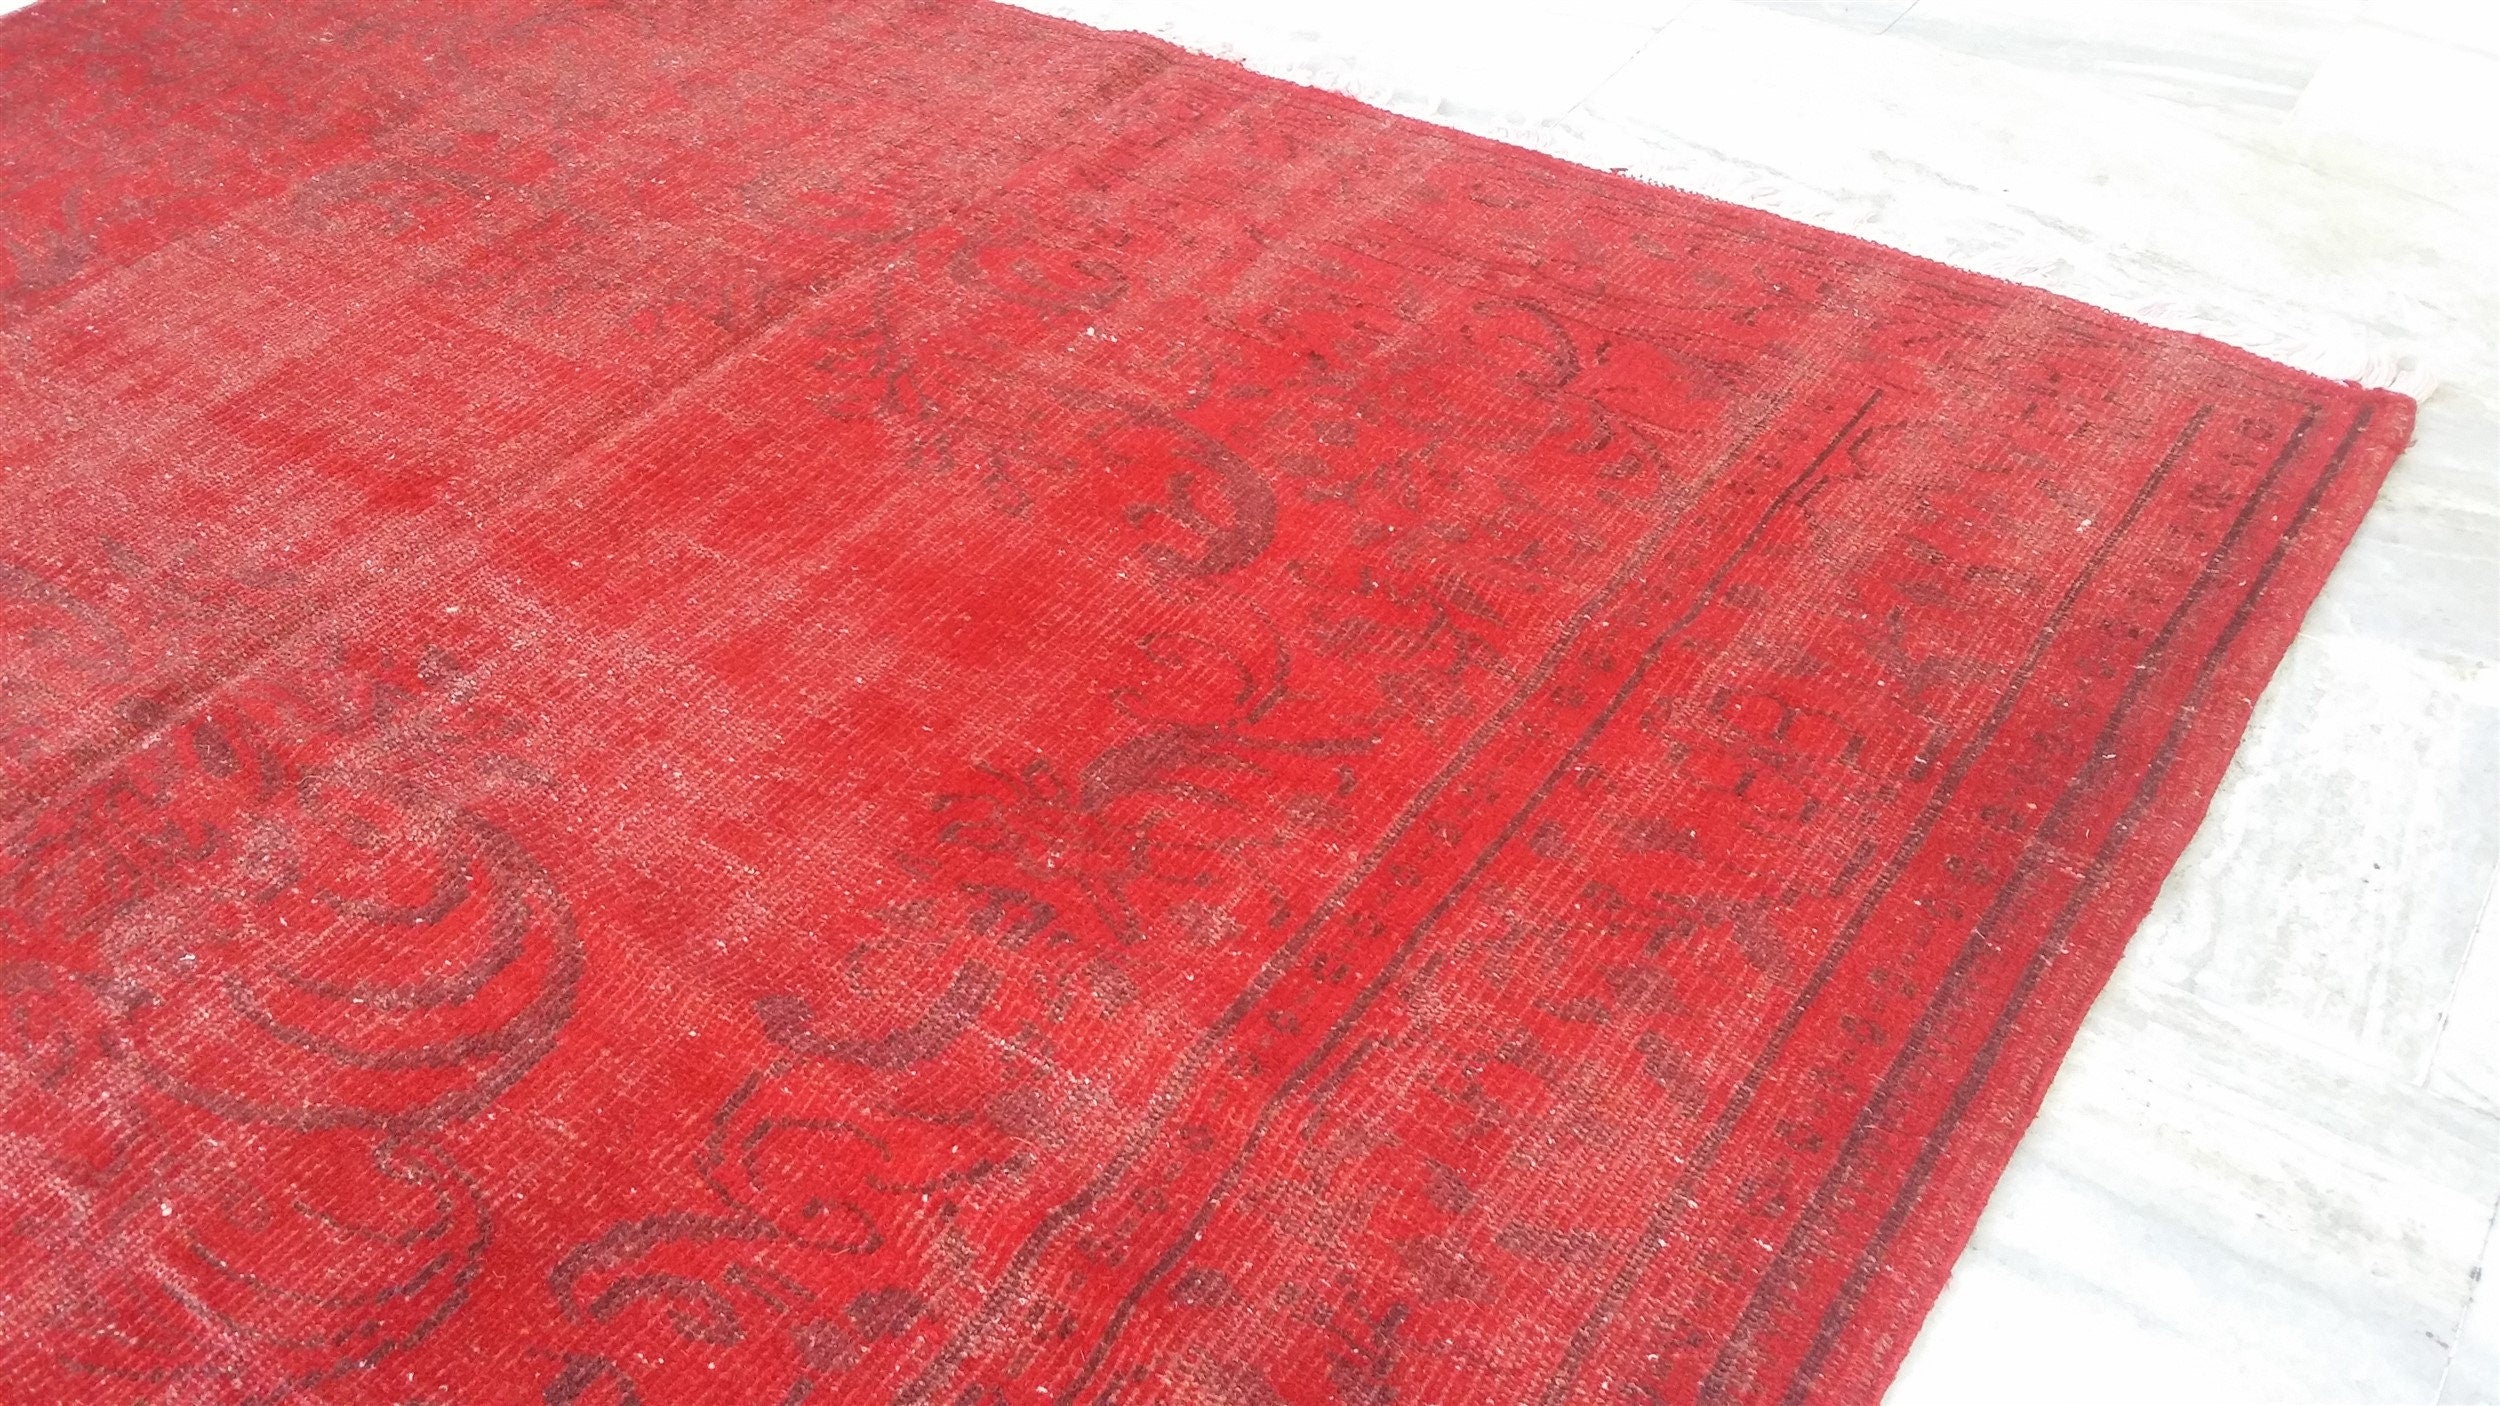 Overdyed Red Turkish Rug, Recycled Vintage Rug, 9'3"x6'2"